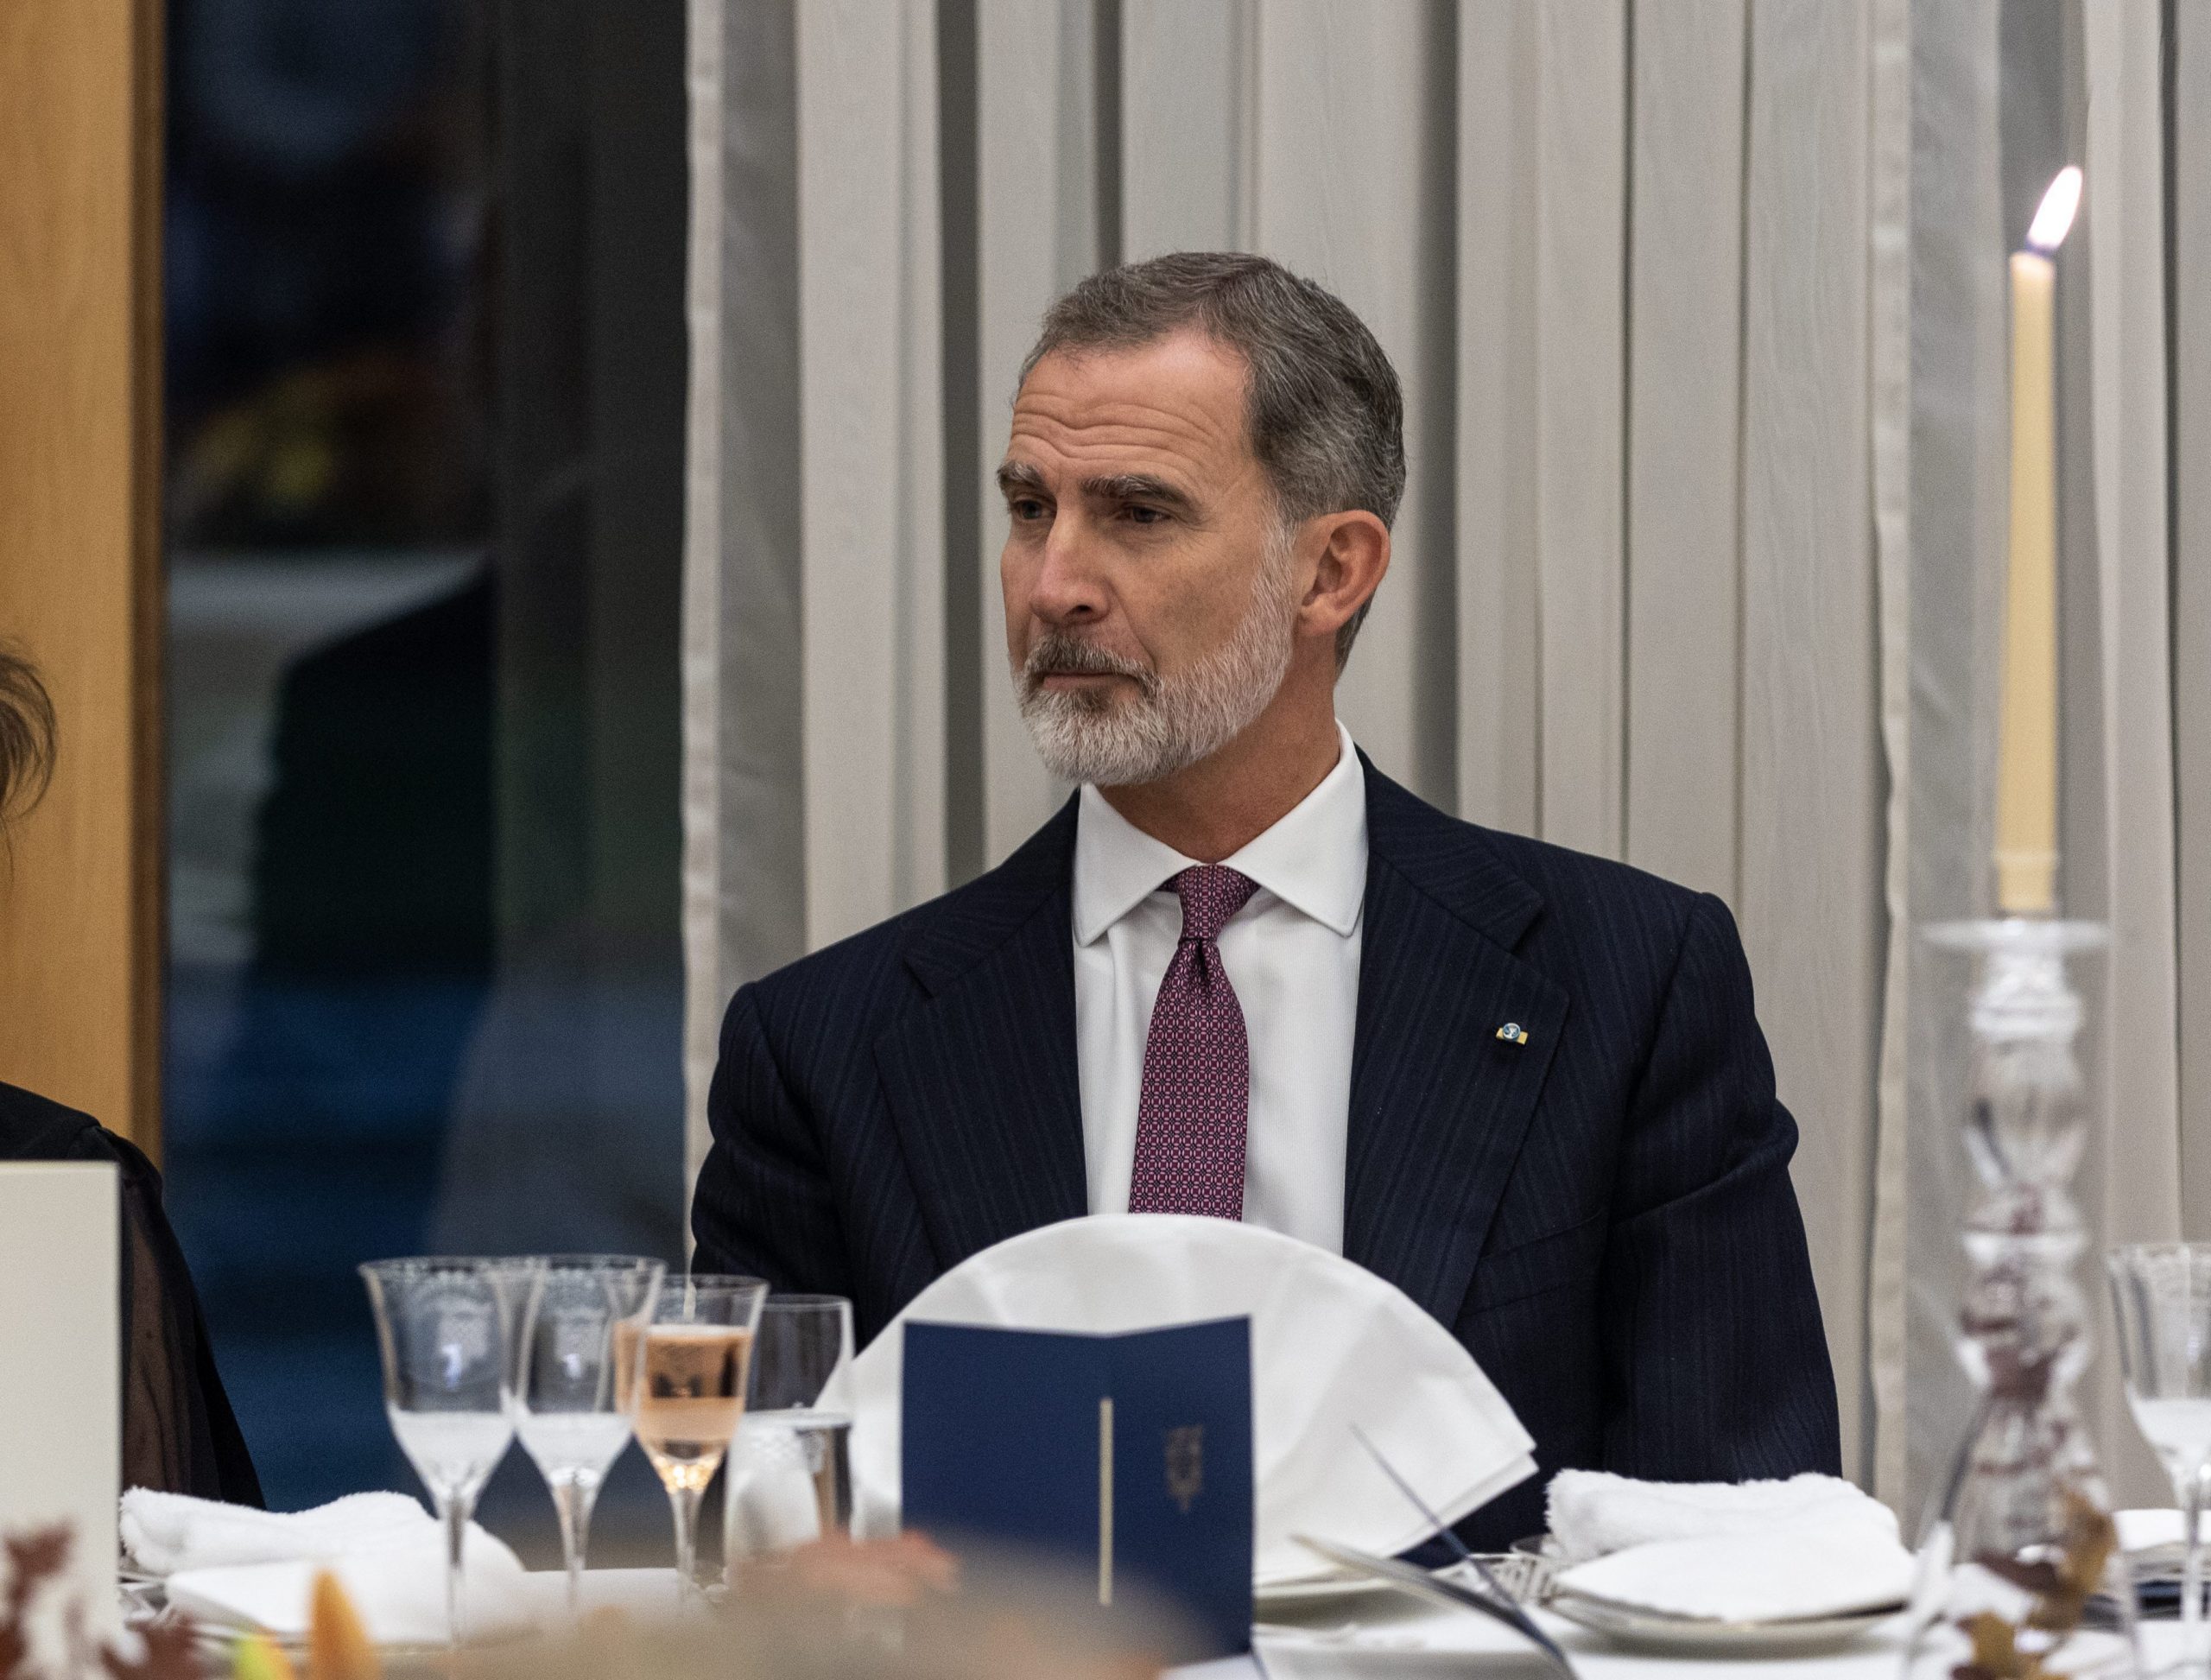 Police officer working as bodyguard for Spain’s King Felipe takes his own life
– News X